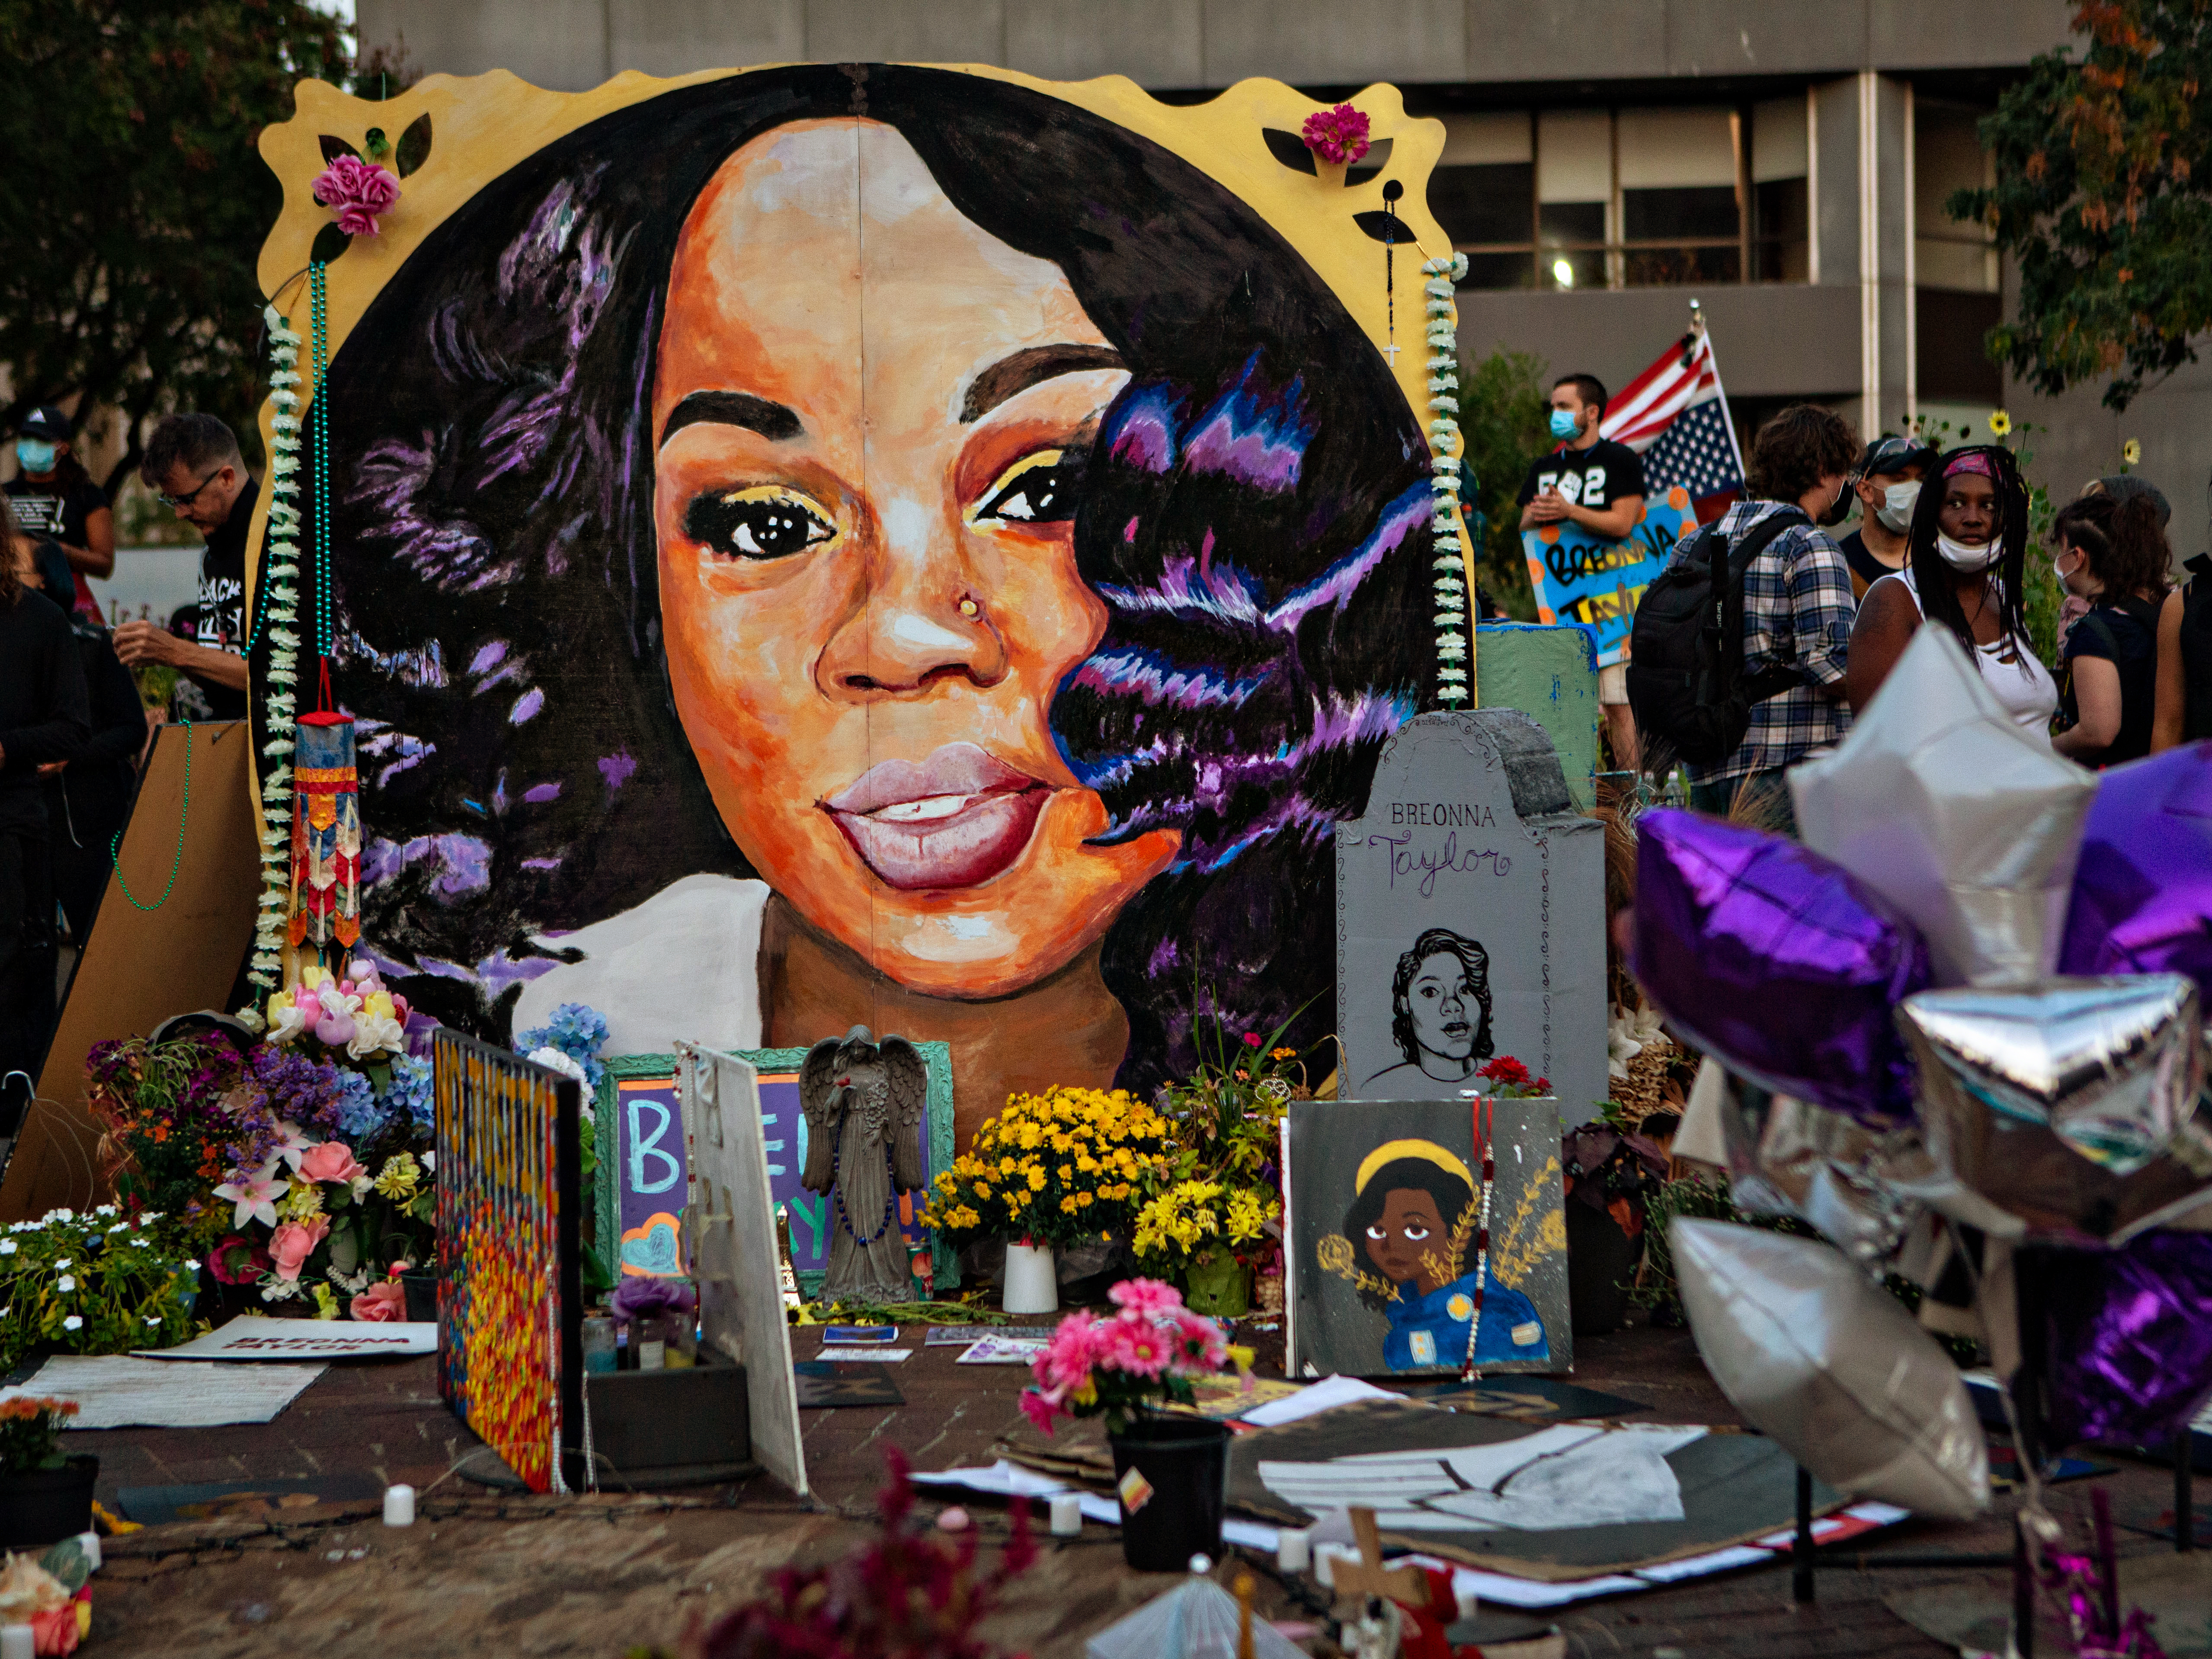 A makeshift memorial in downtown Louisville, Ky., for Breonna Taylor in September 2020. Taylor was killed a year ago in her home during a botched narcotics raid carried out by Louisville police. CREDIT: Jason Armond/Los Angeles Times via Getty Images